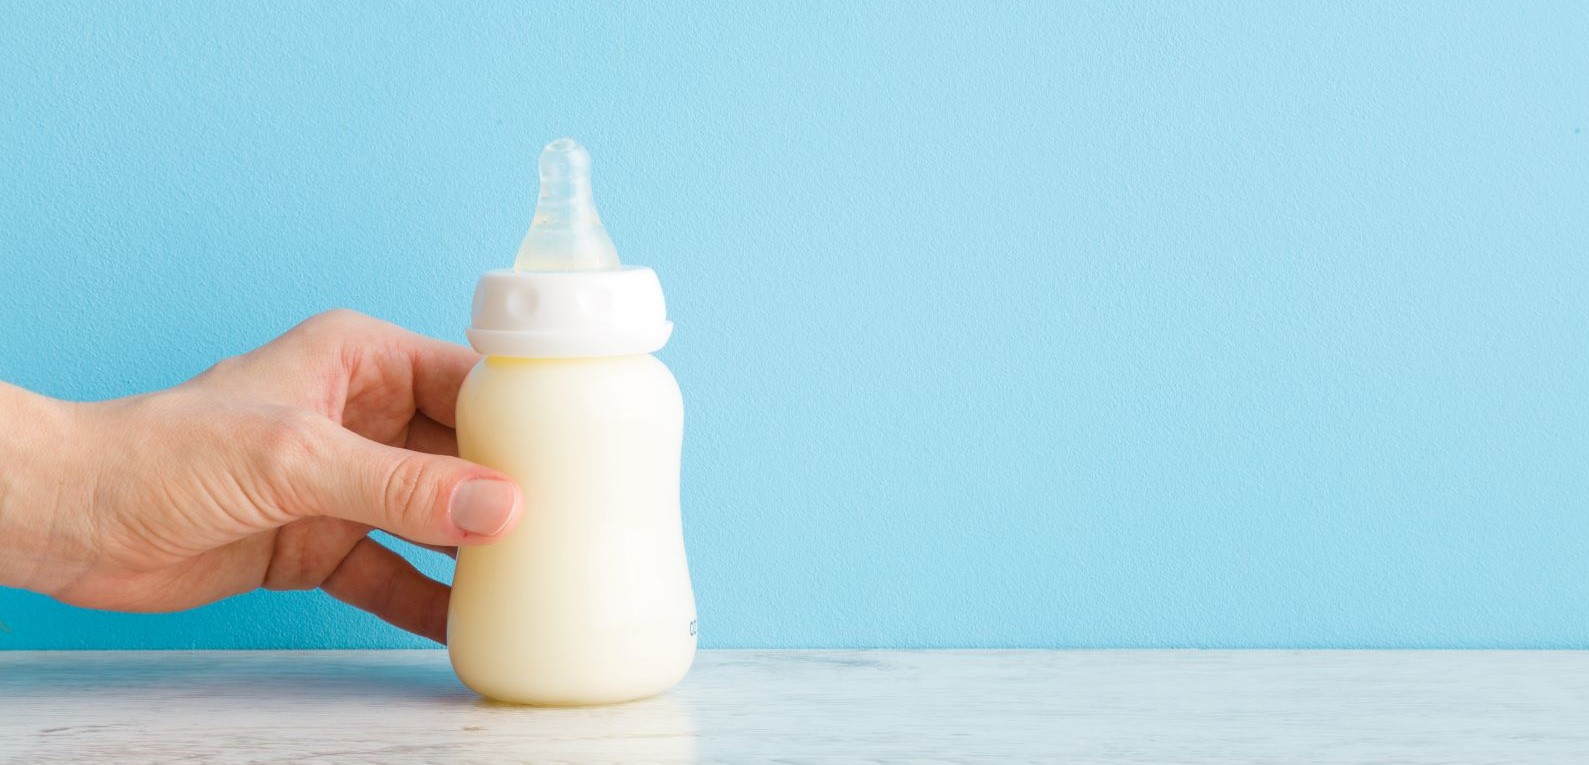 Baby Formula Shortages Cause High Anxiety: How Parents Can Cope